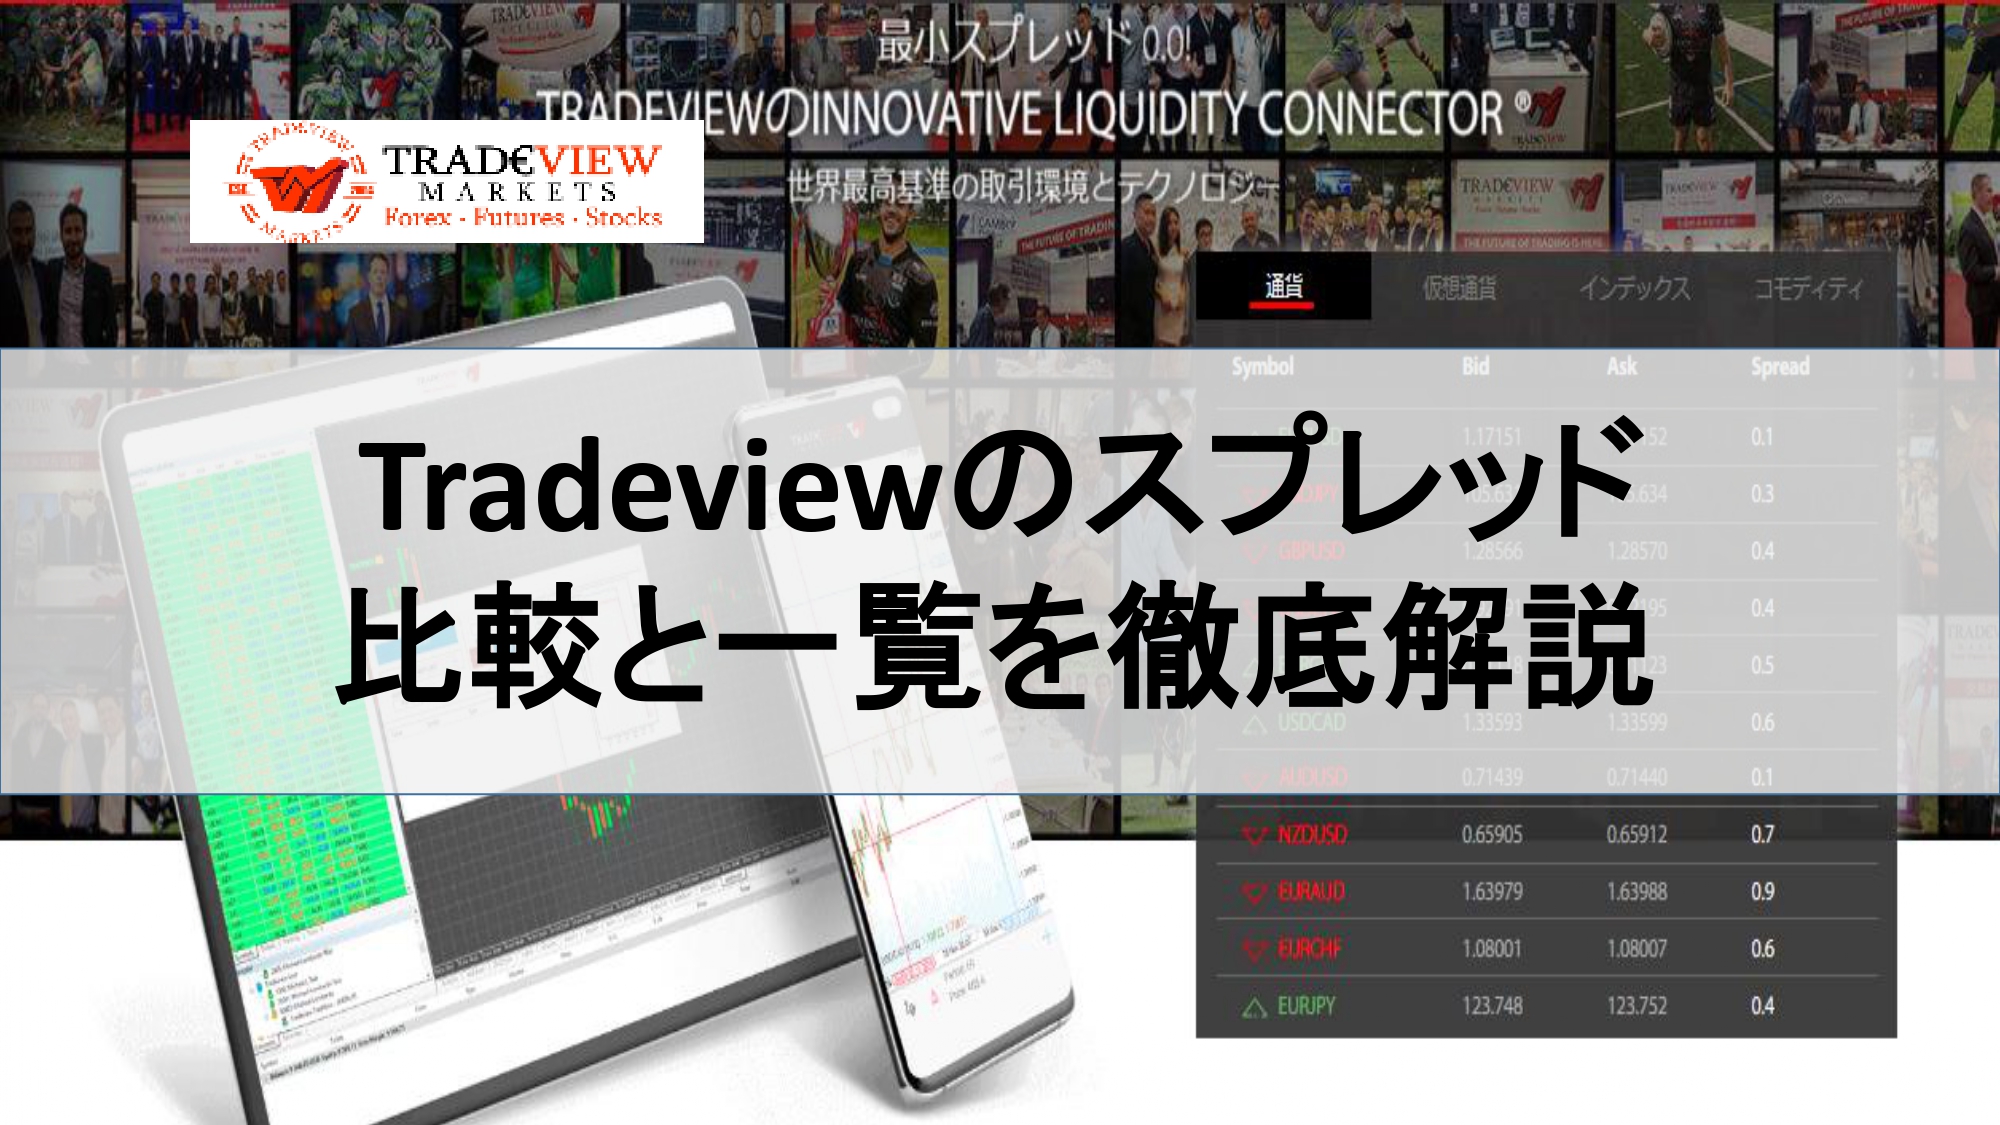 Tradeviewのスプレッドの比較と一覧